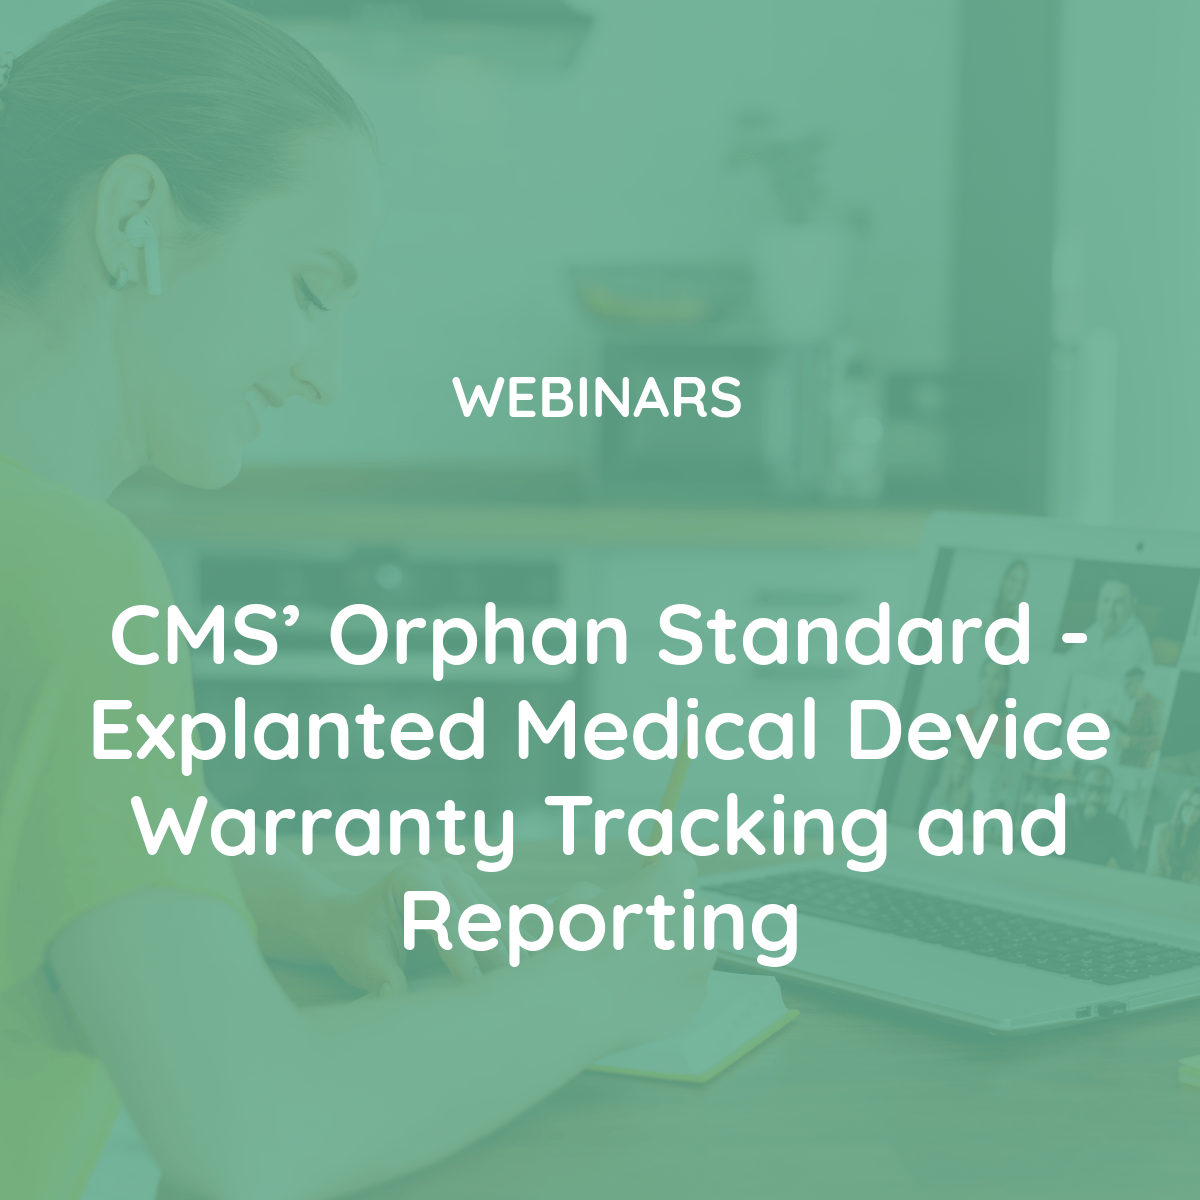 CMS’ Orphan Standard – Explanted Medical Device Warranty Tracking and Reporting